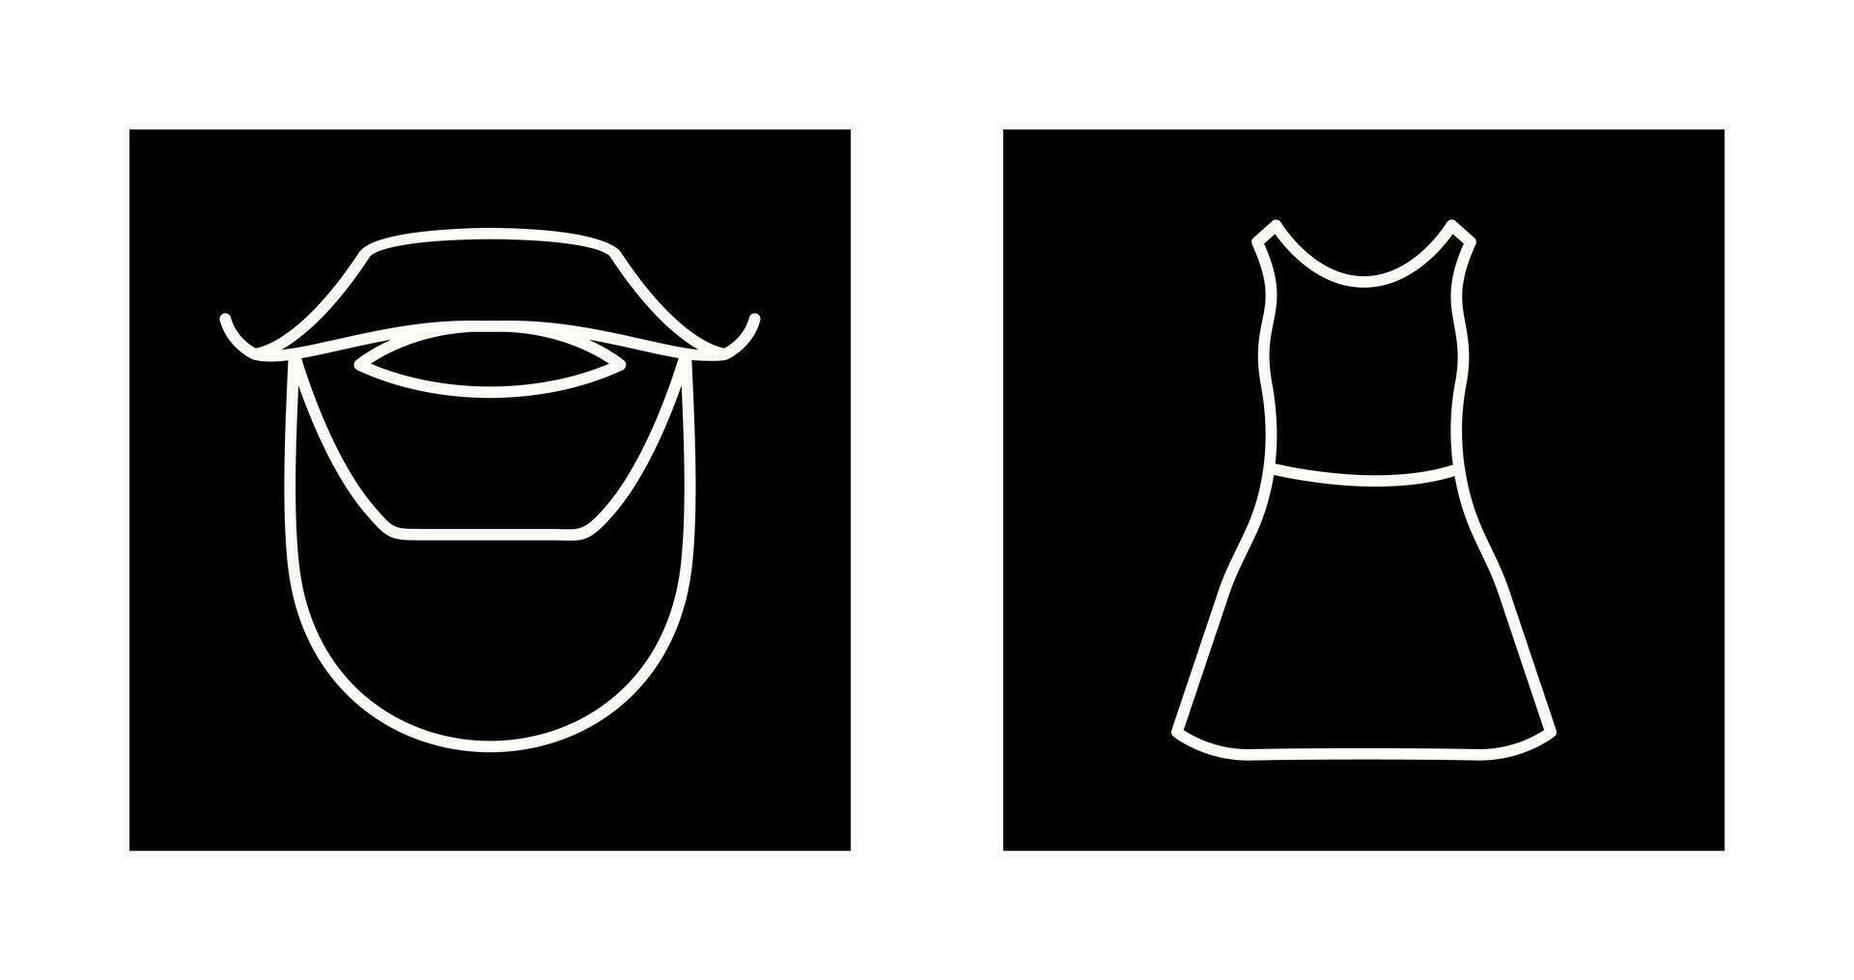 Beard and Moustache and Dress Icon vector